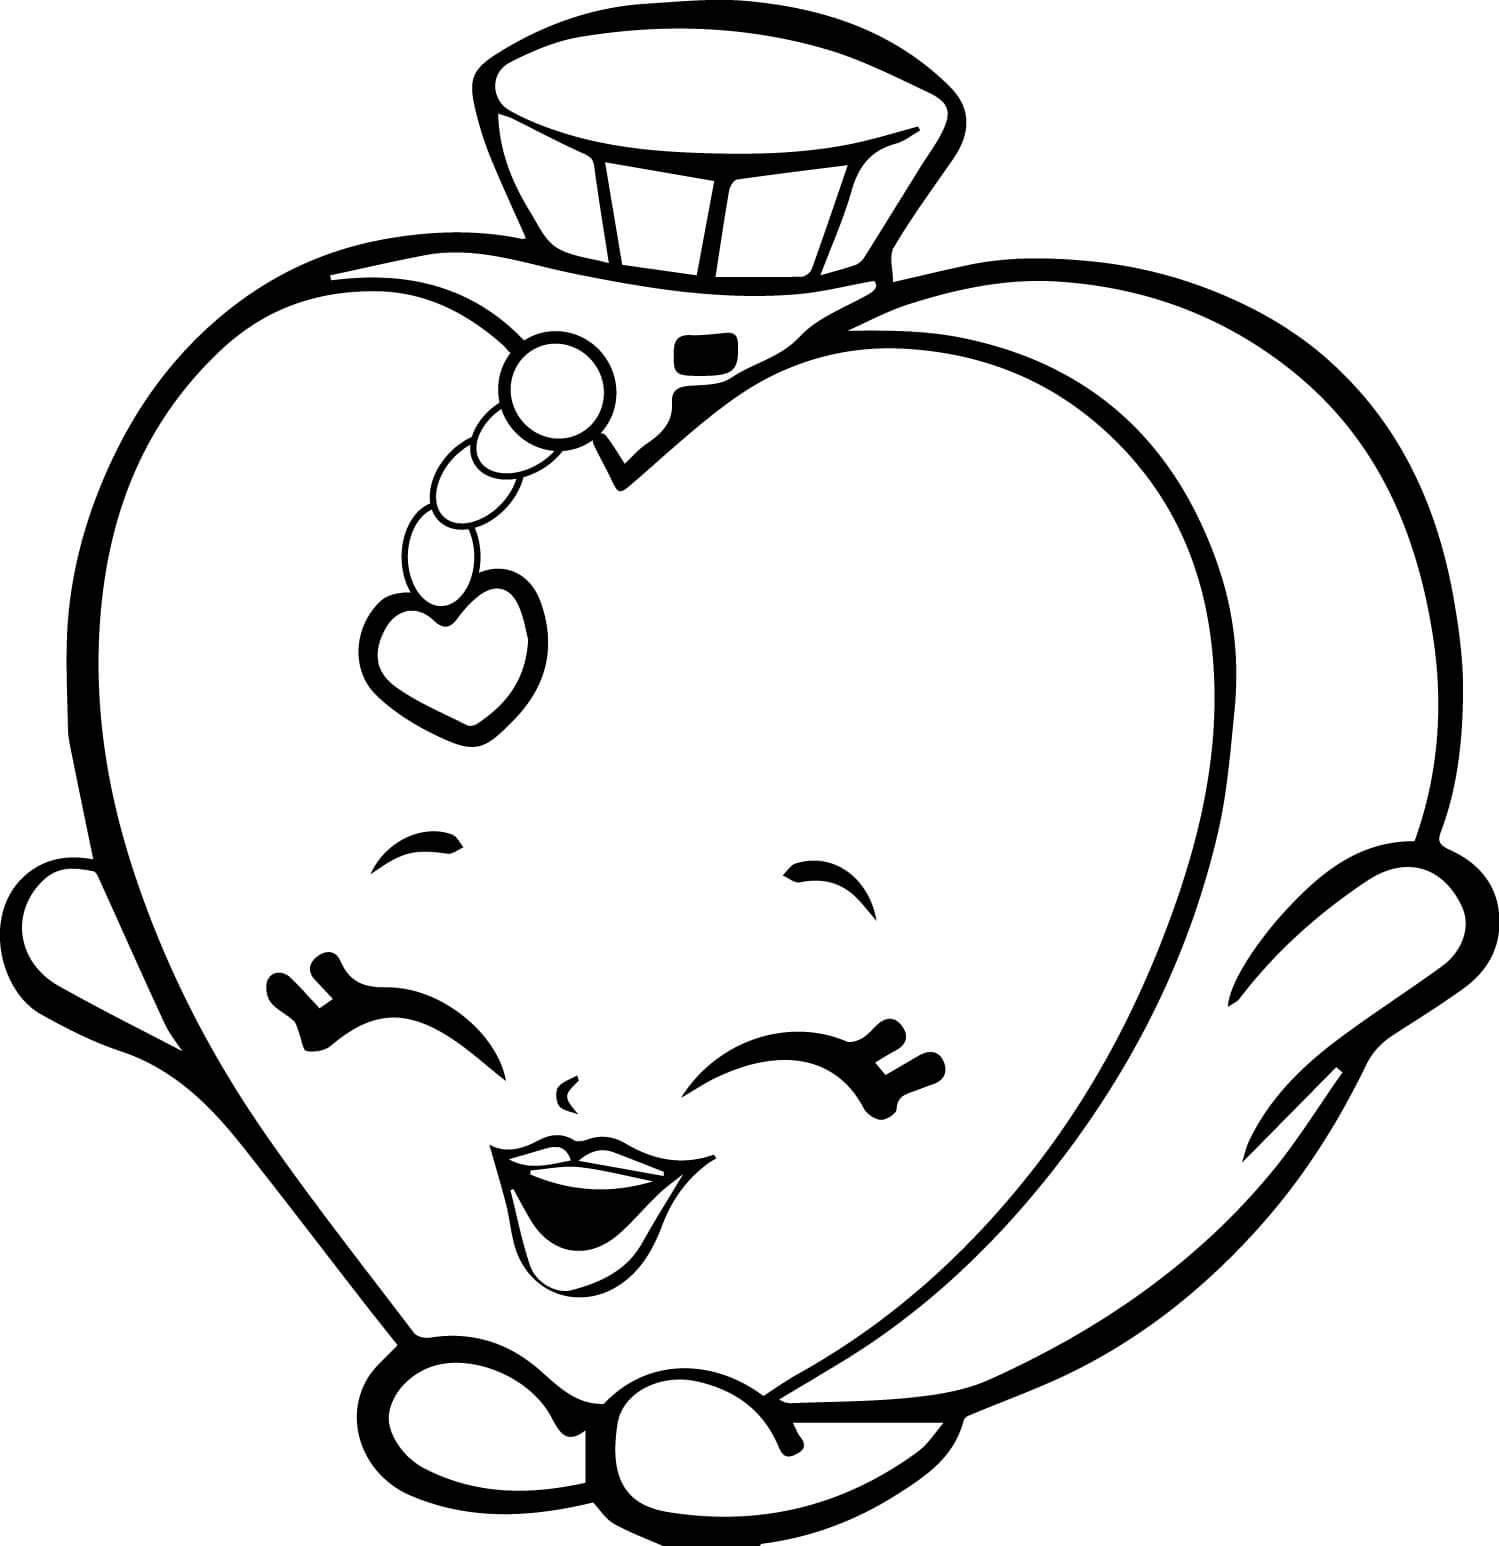 Shopkins Coloring Pages - Sally Scent